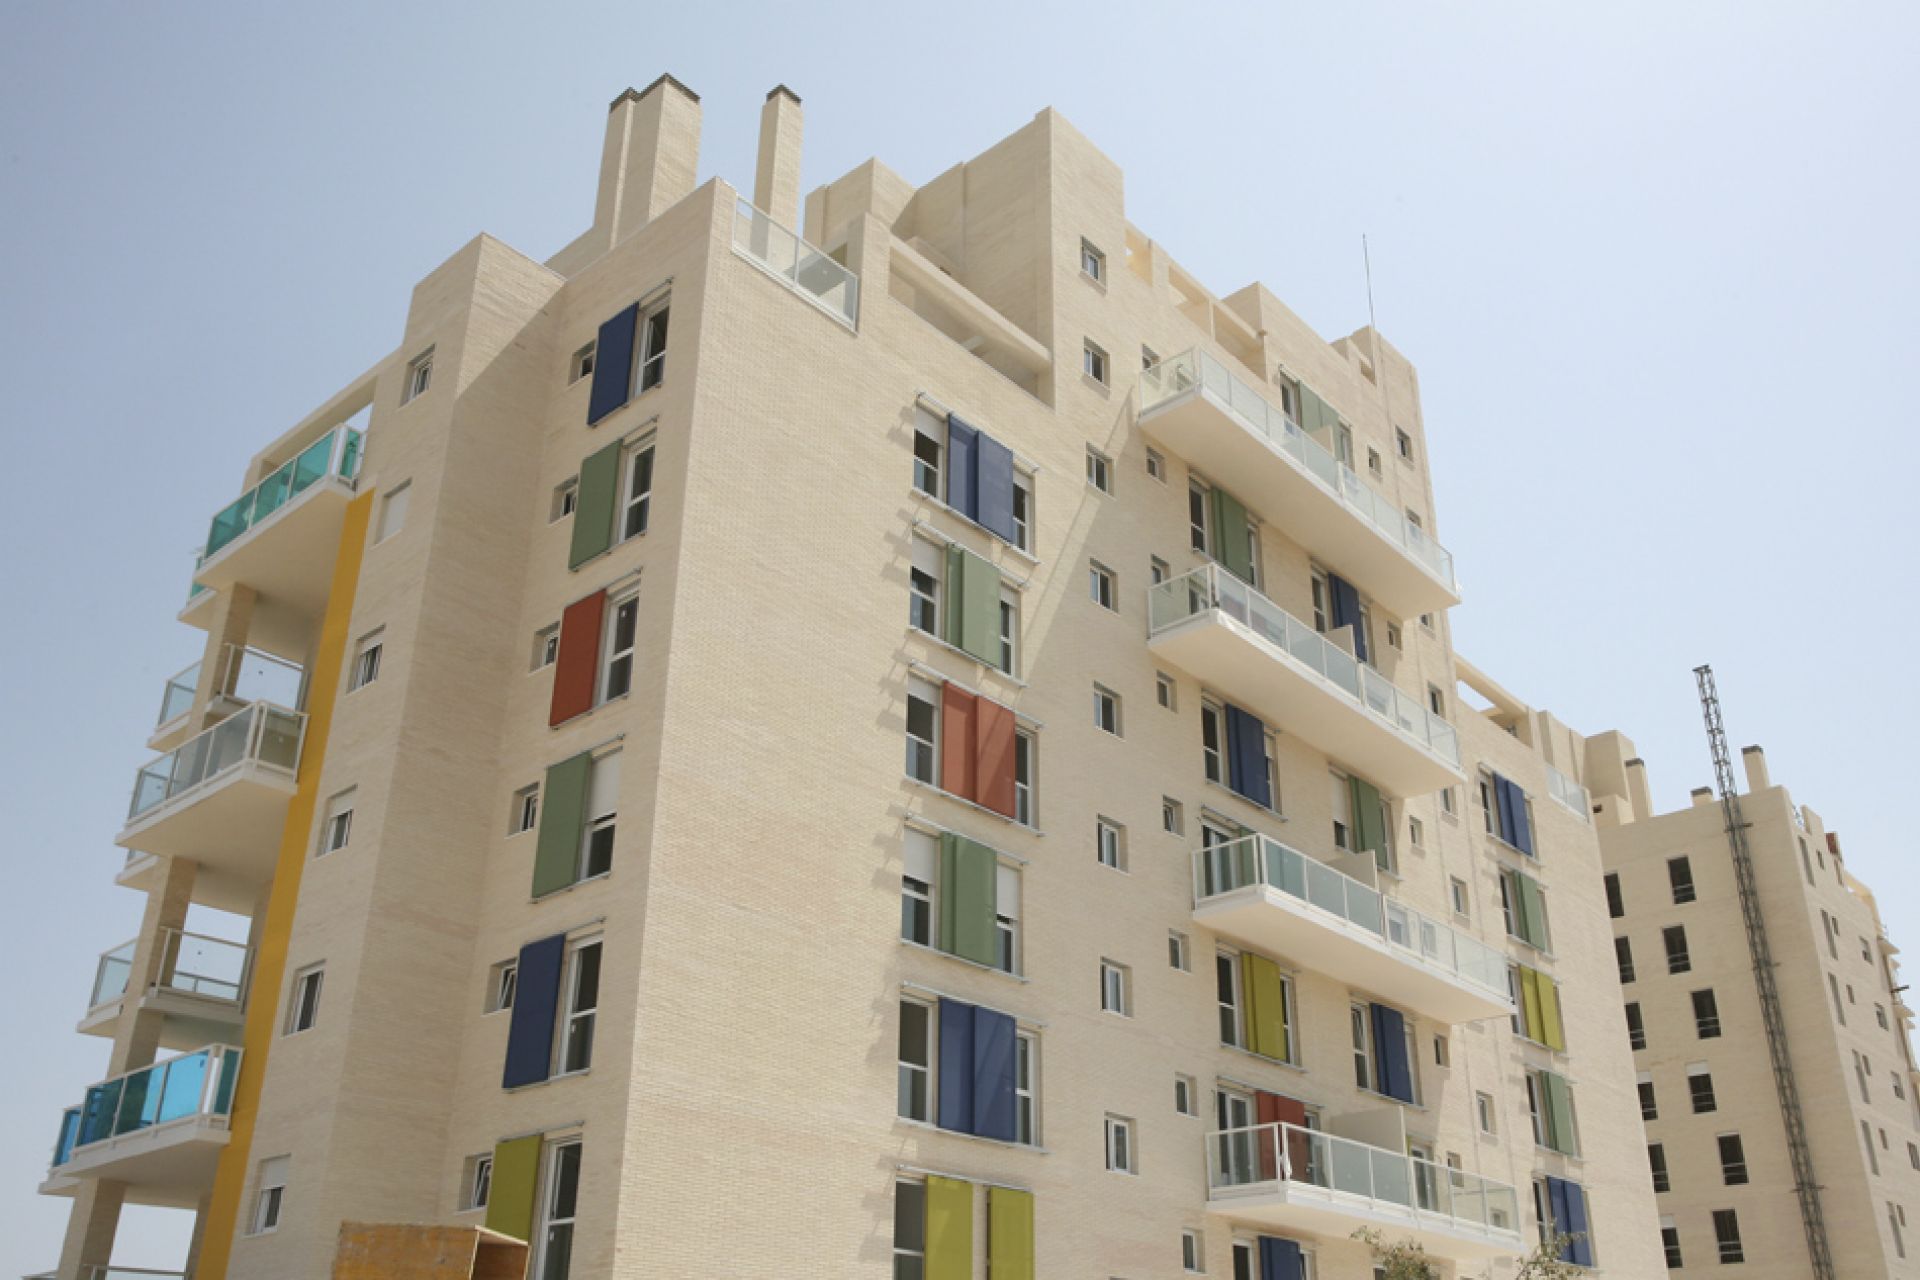 Building with colored i-tensing panels